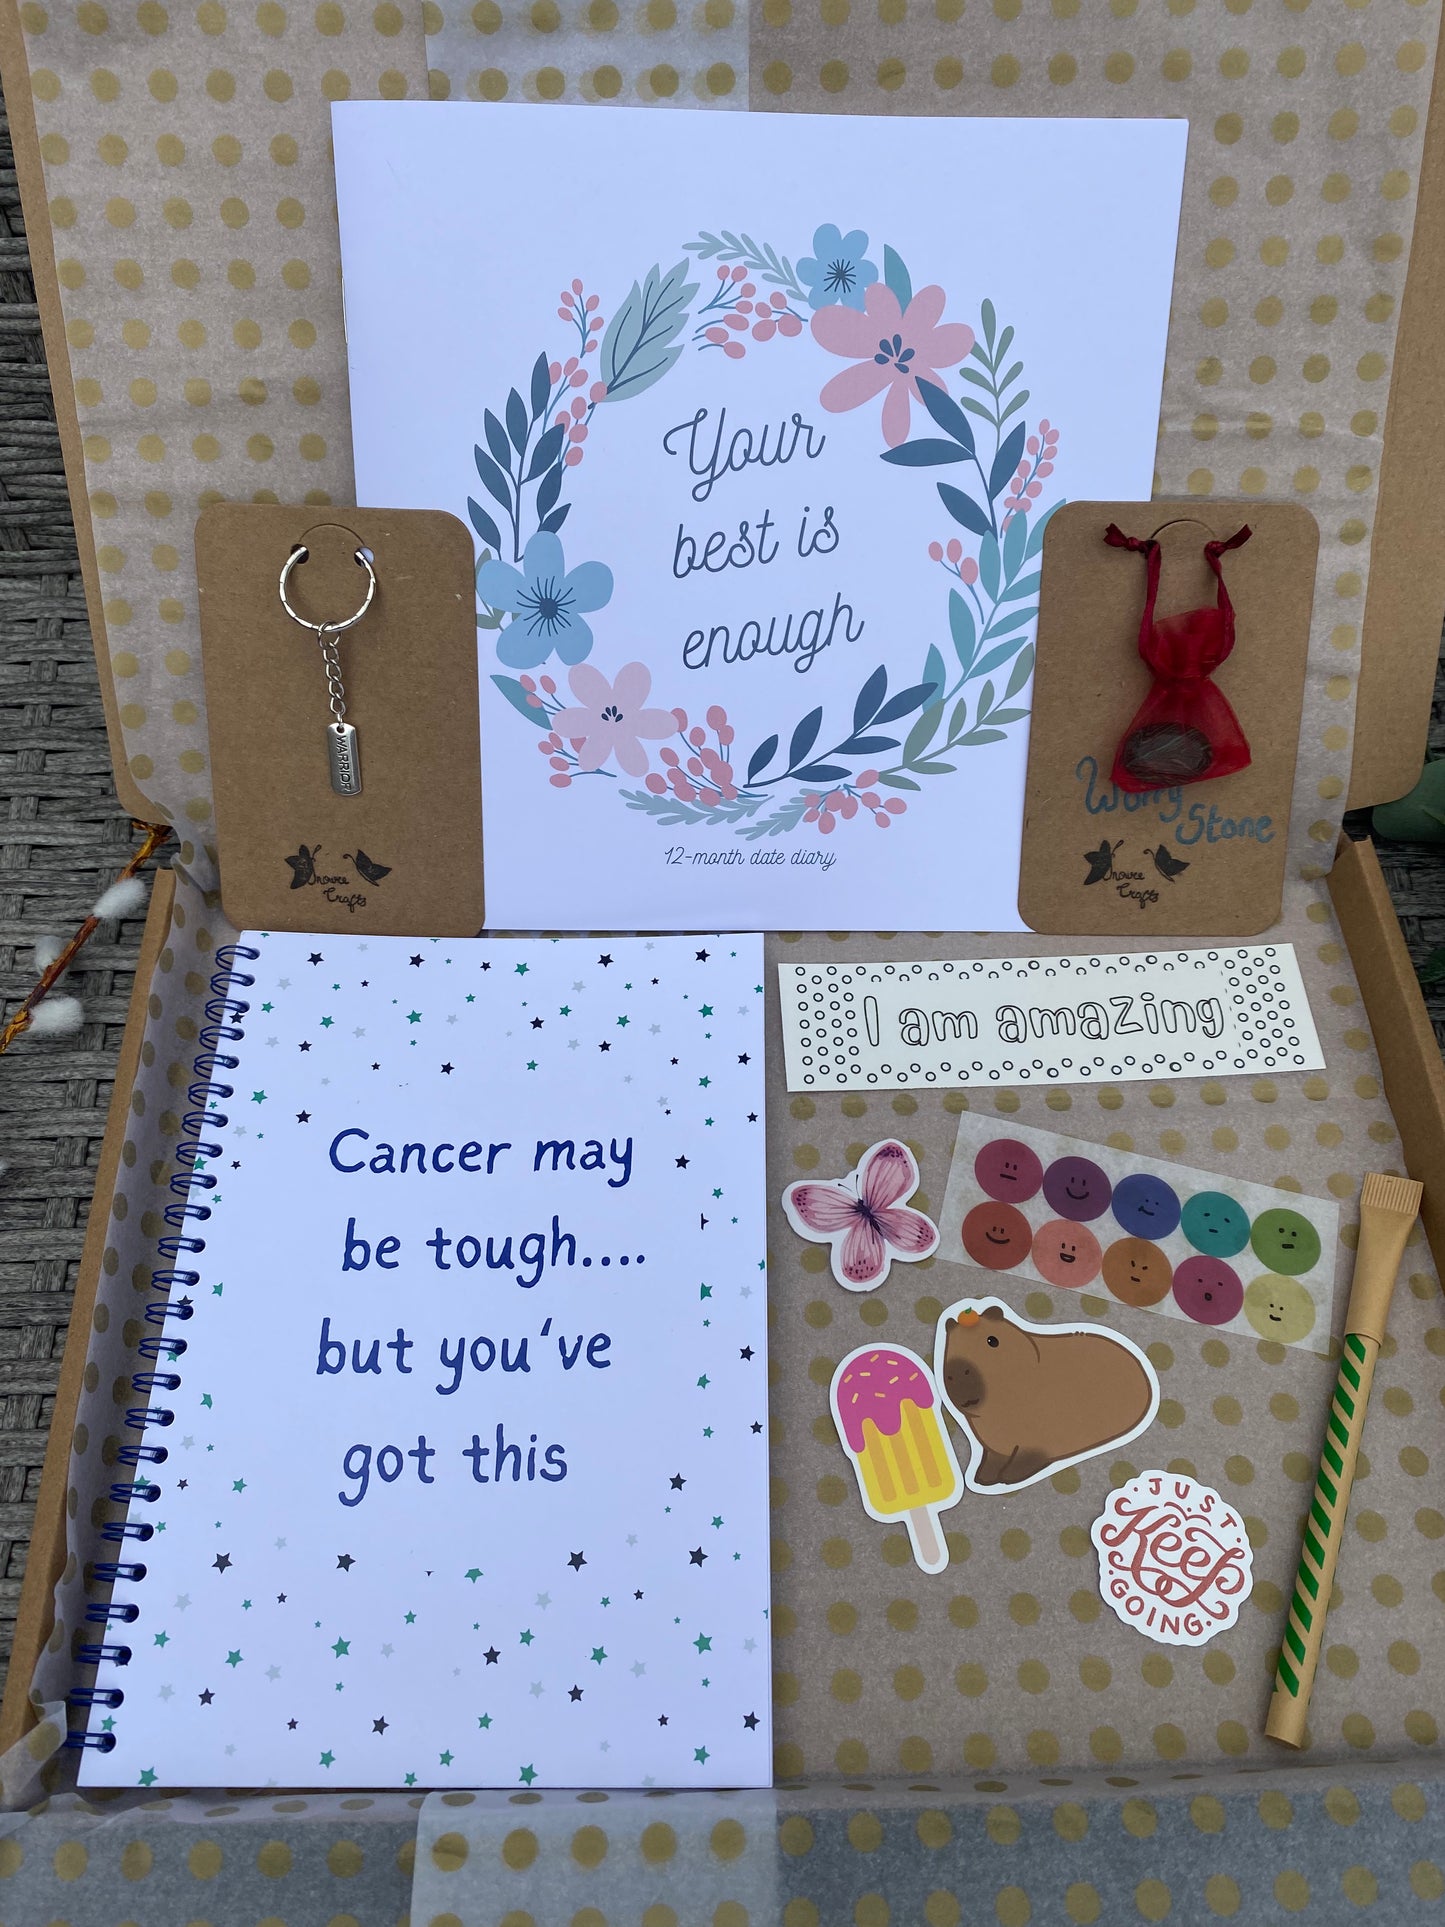 Cancer care gift // Medium Cancer package